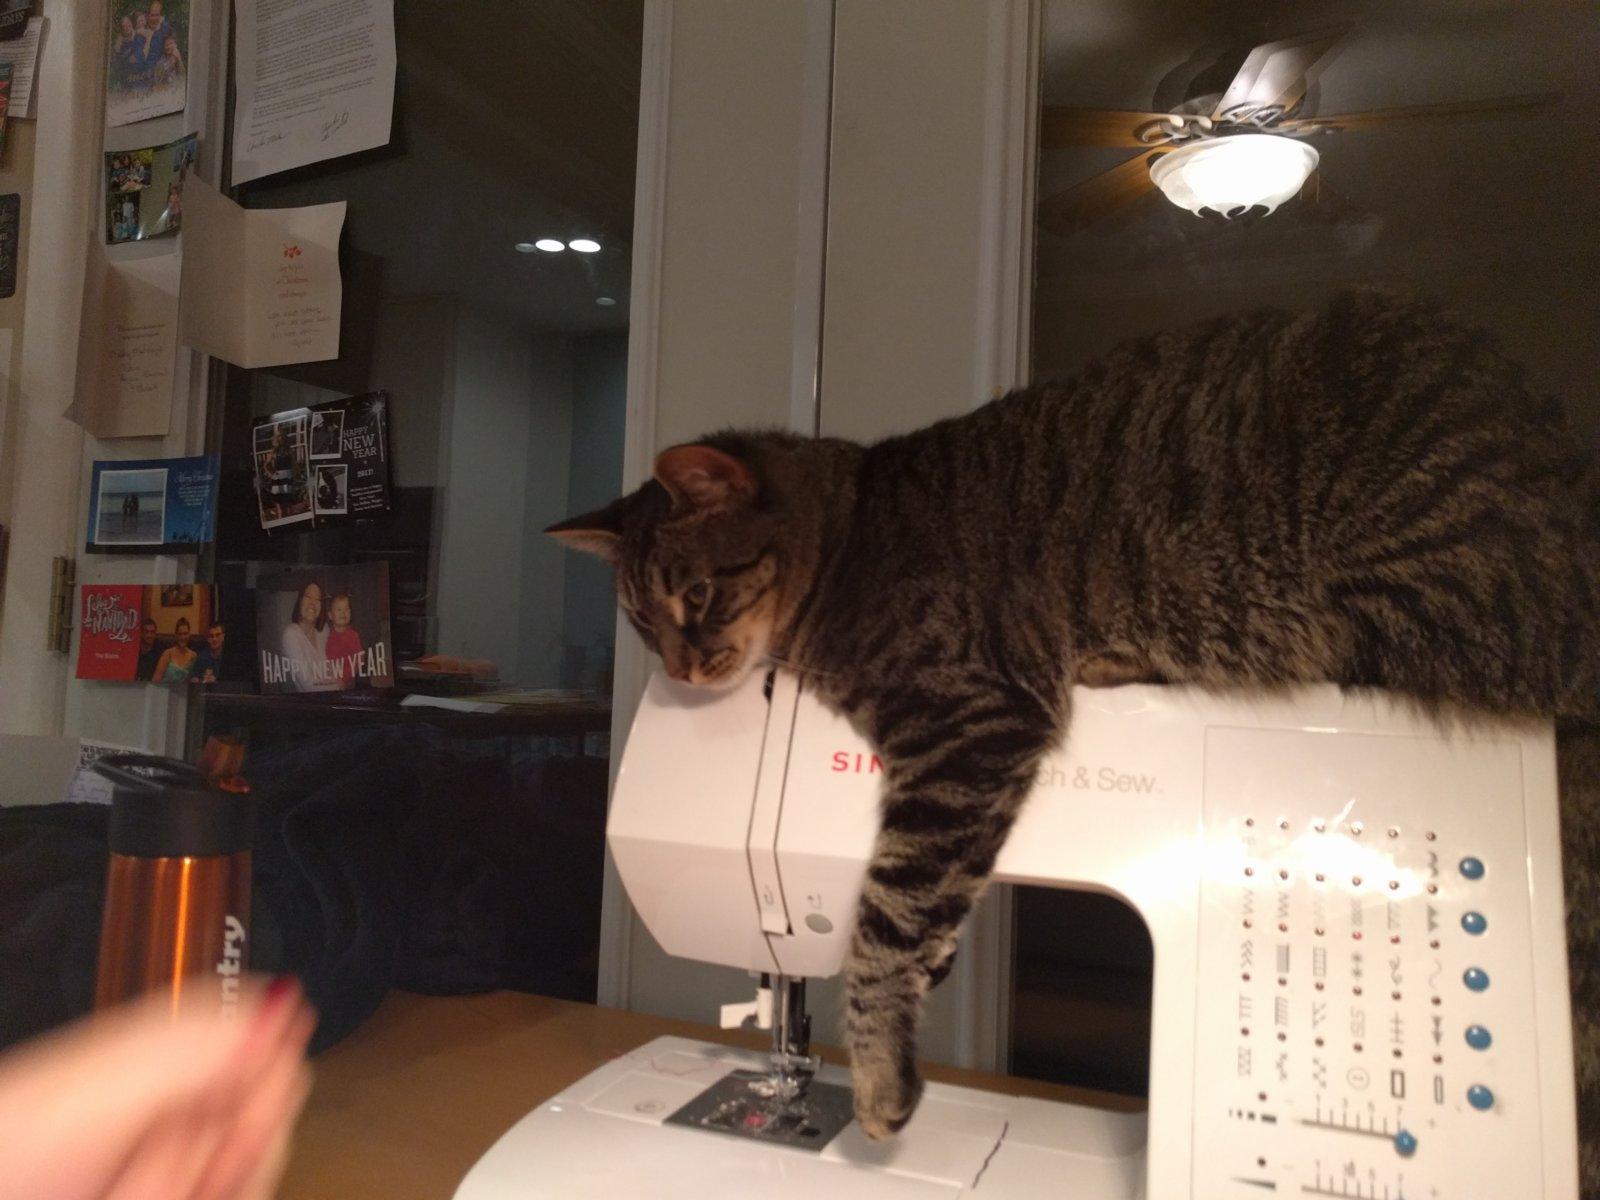 Then she decided she wanted to learn to sew.